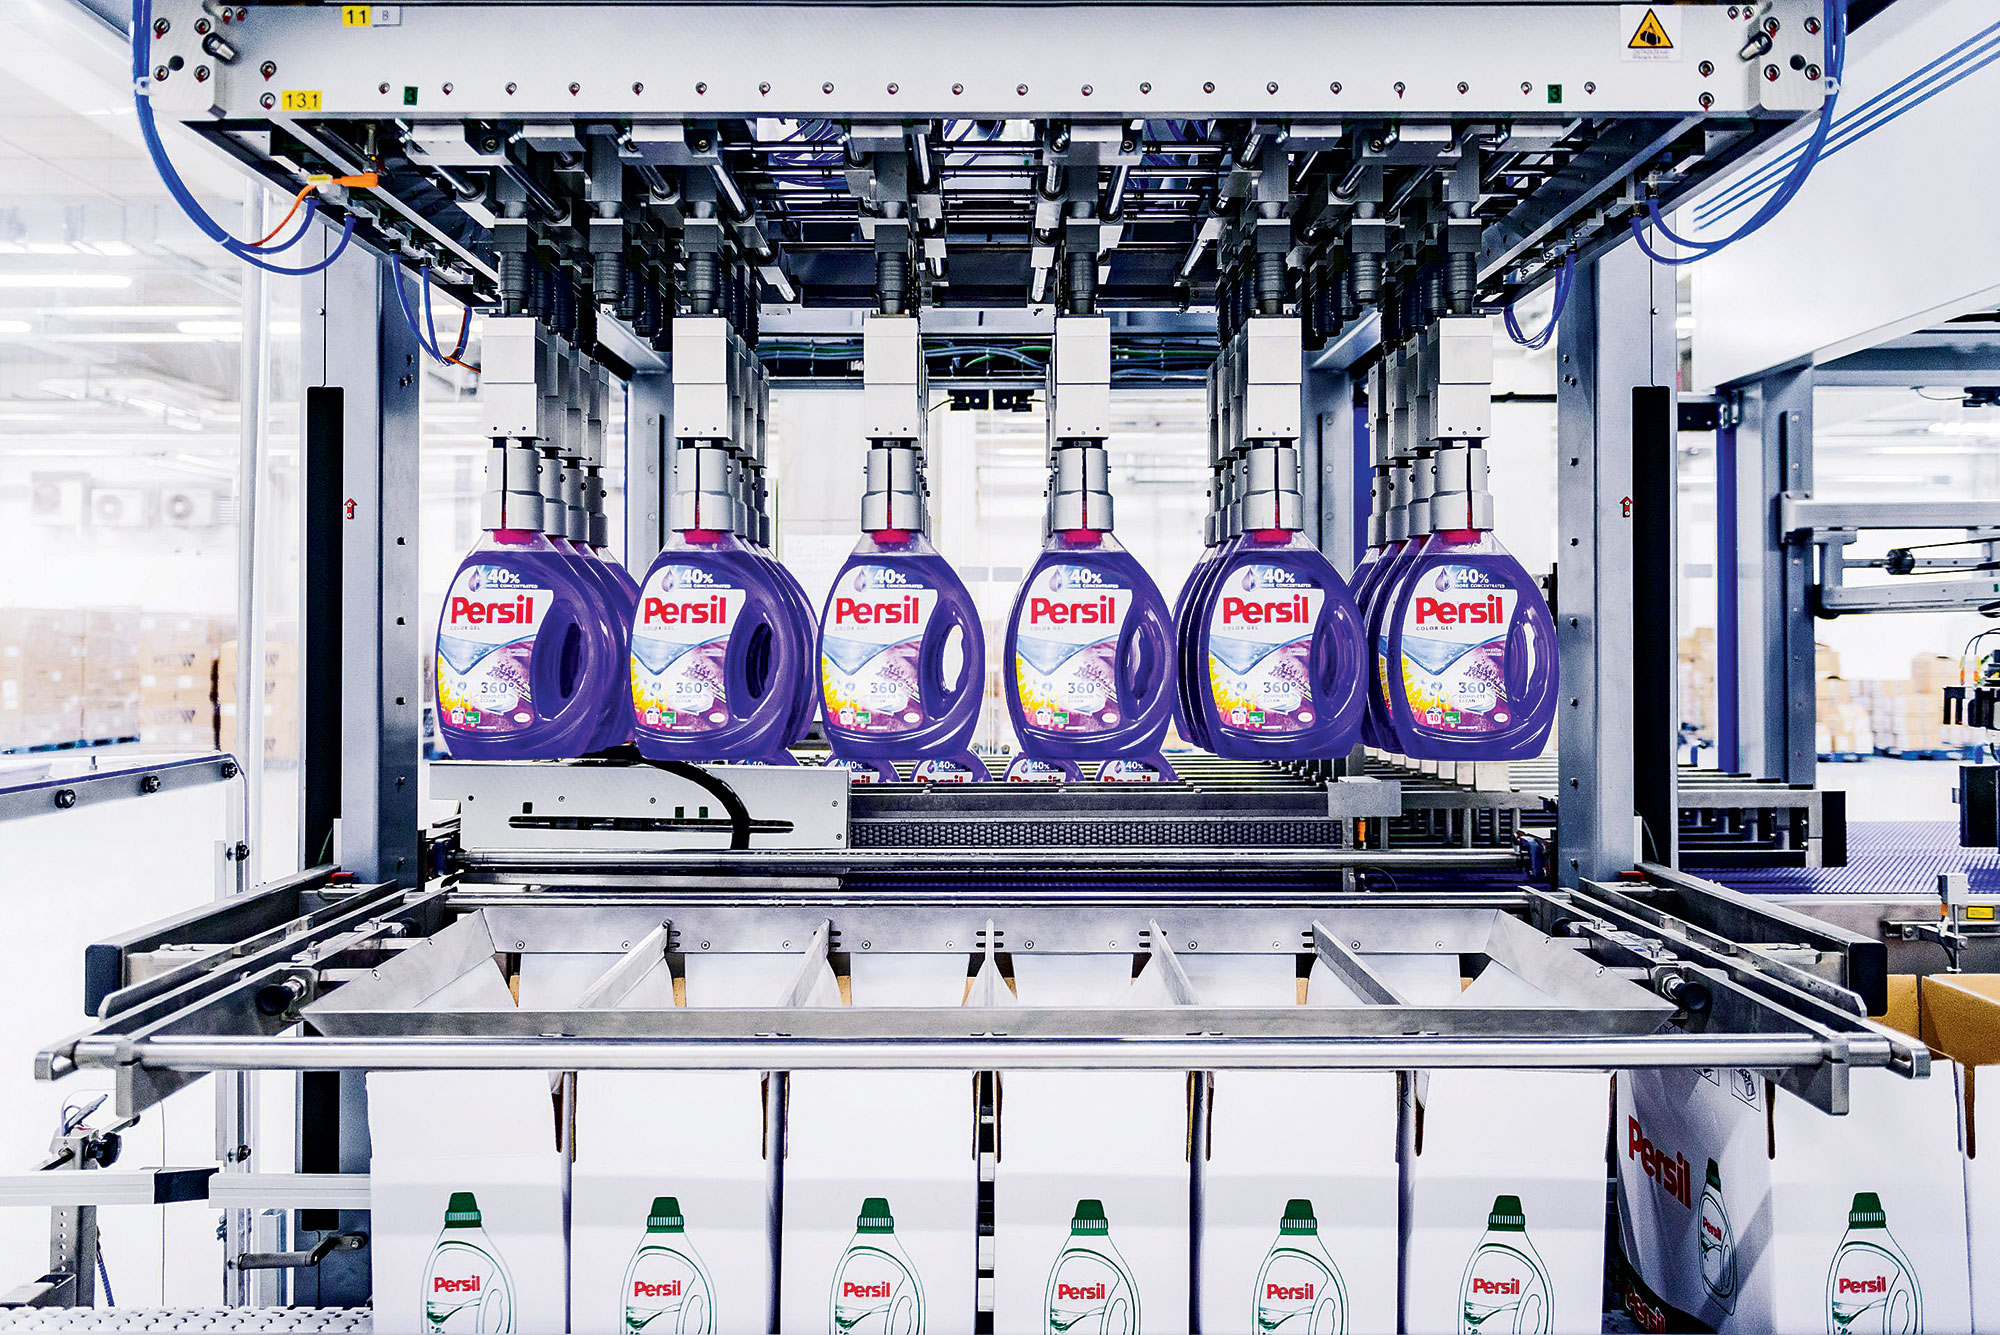 Spill Provides Marketing Opportunity for Dawn Detergent - The New York Times